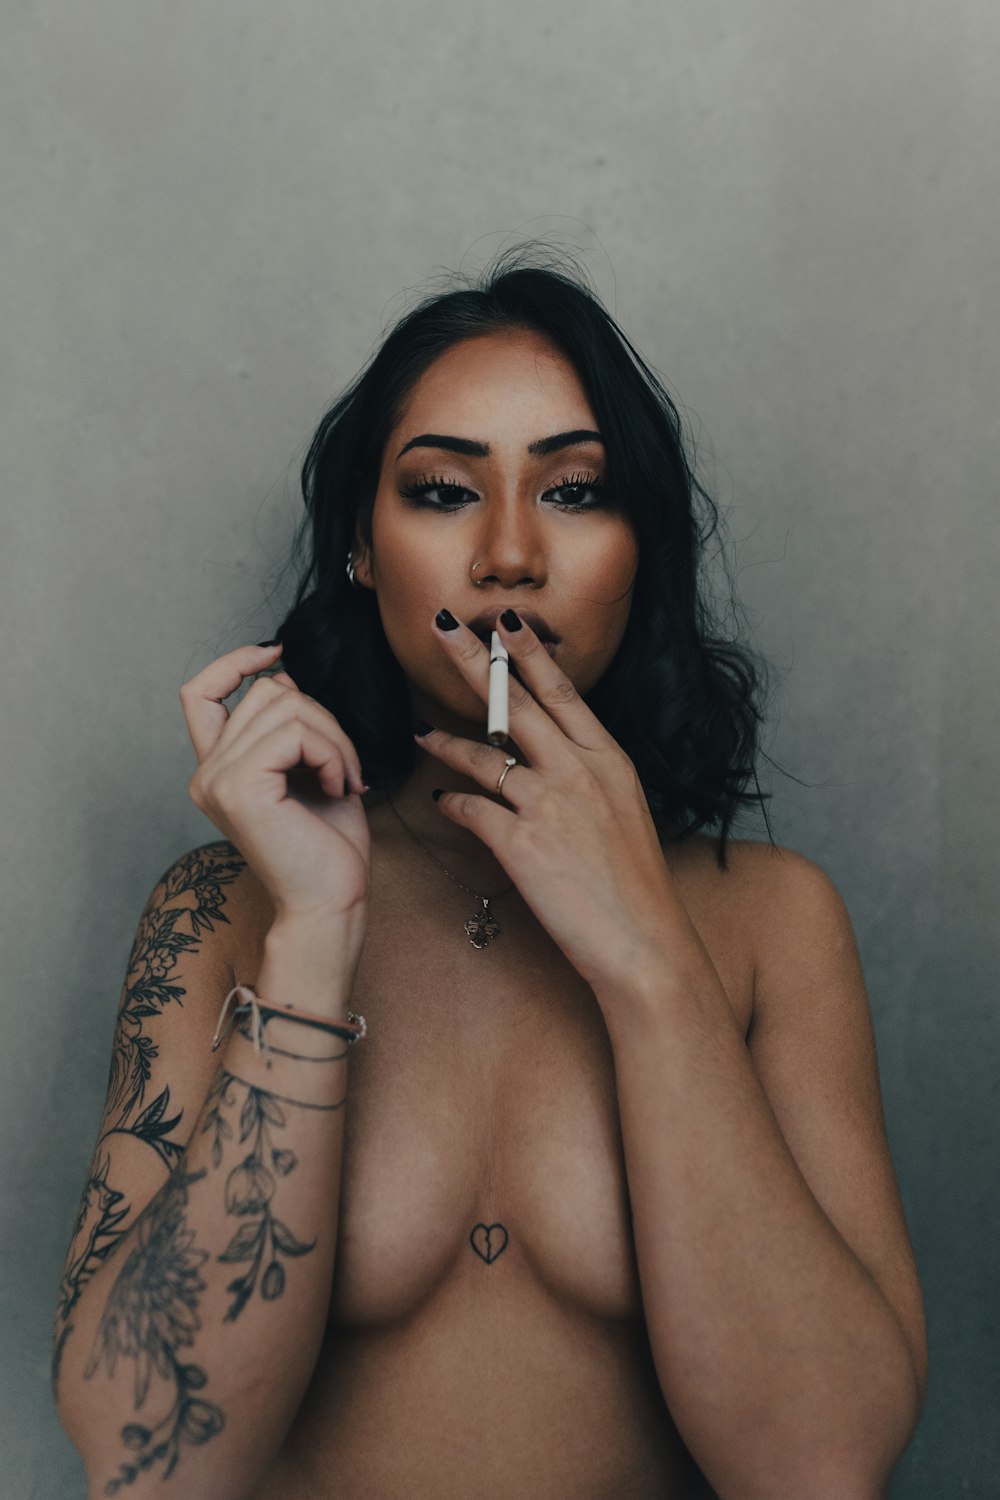 topless woman holding cigarette stick